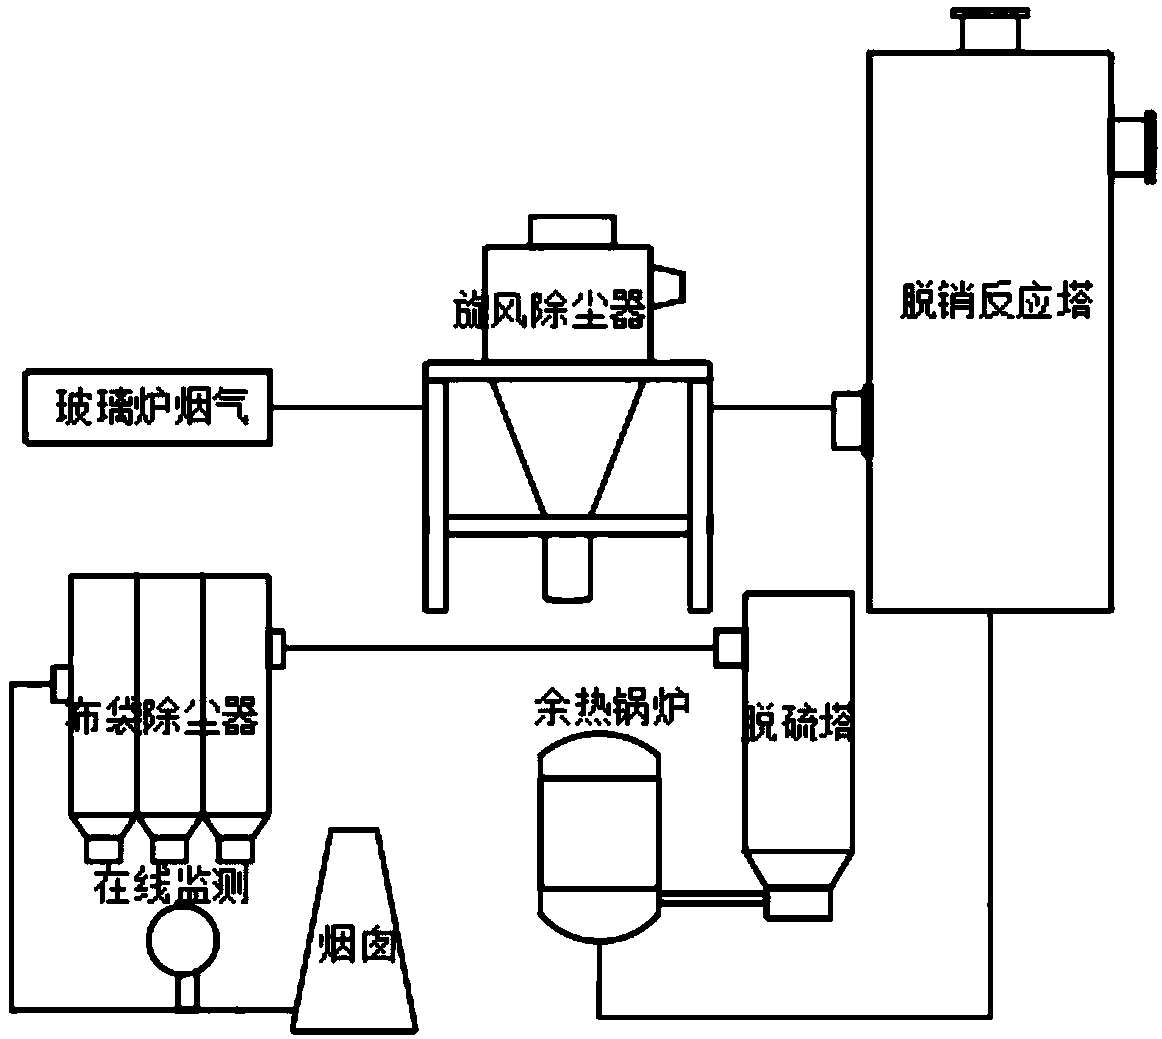 Desulfurization, denitrification, dust removal and waste heat recovery integrated comprehensive technology for waste gas in furnace